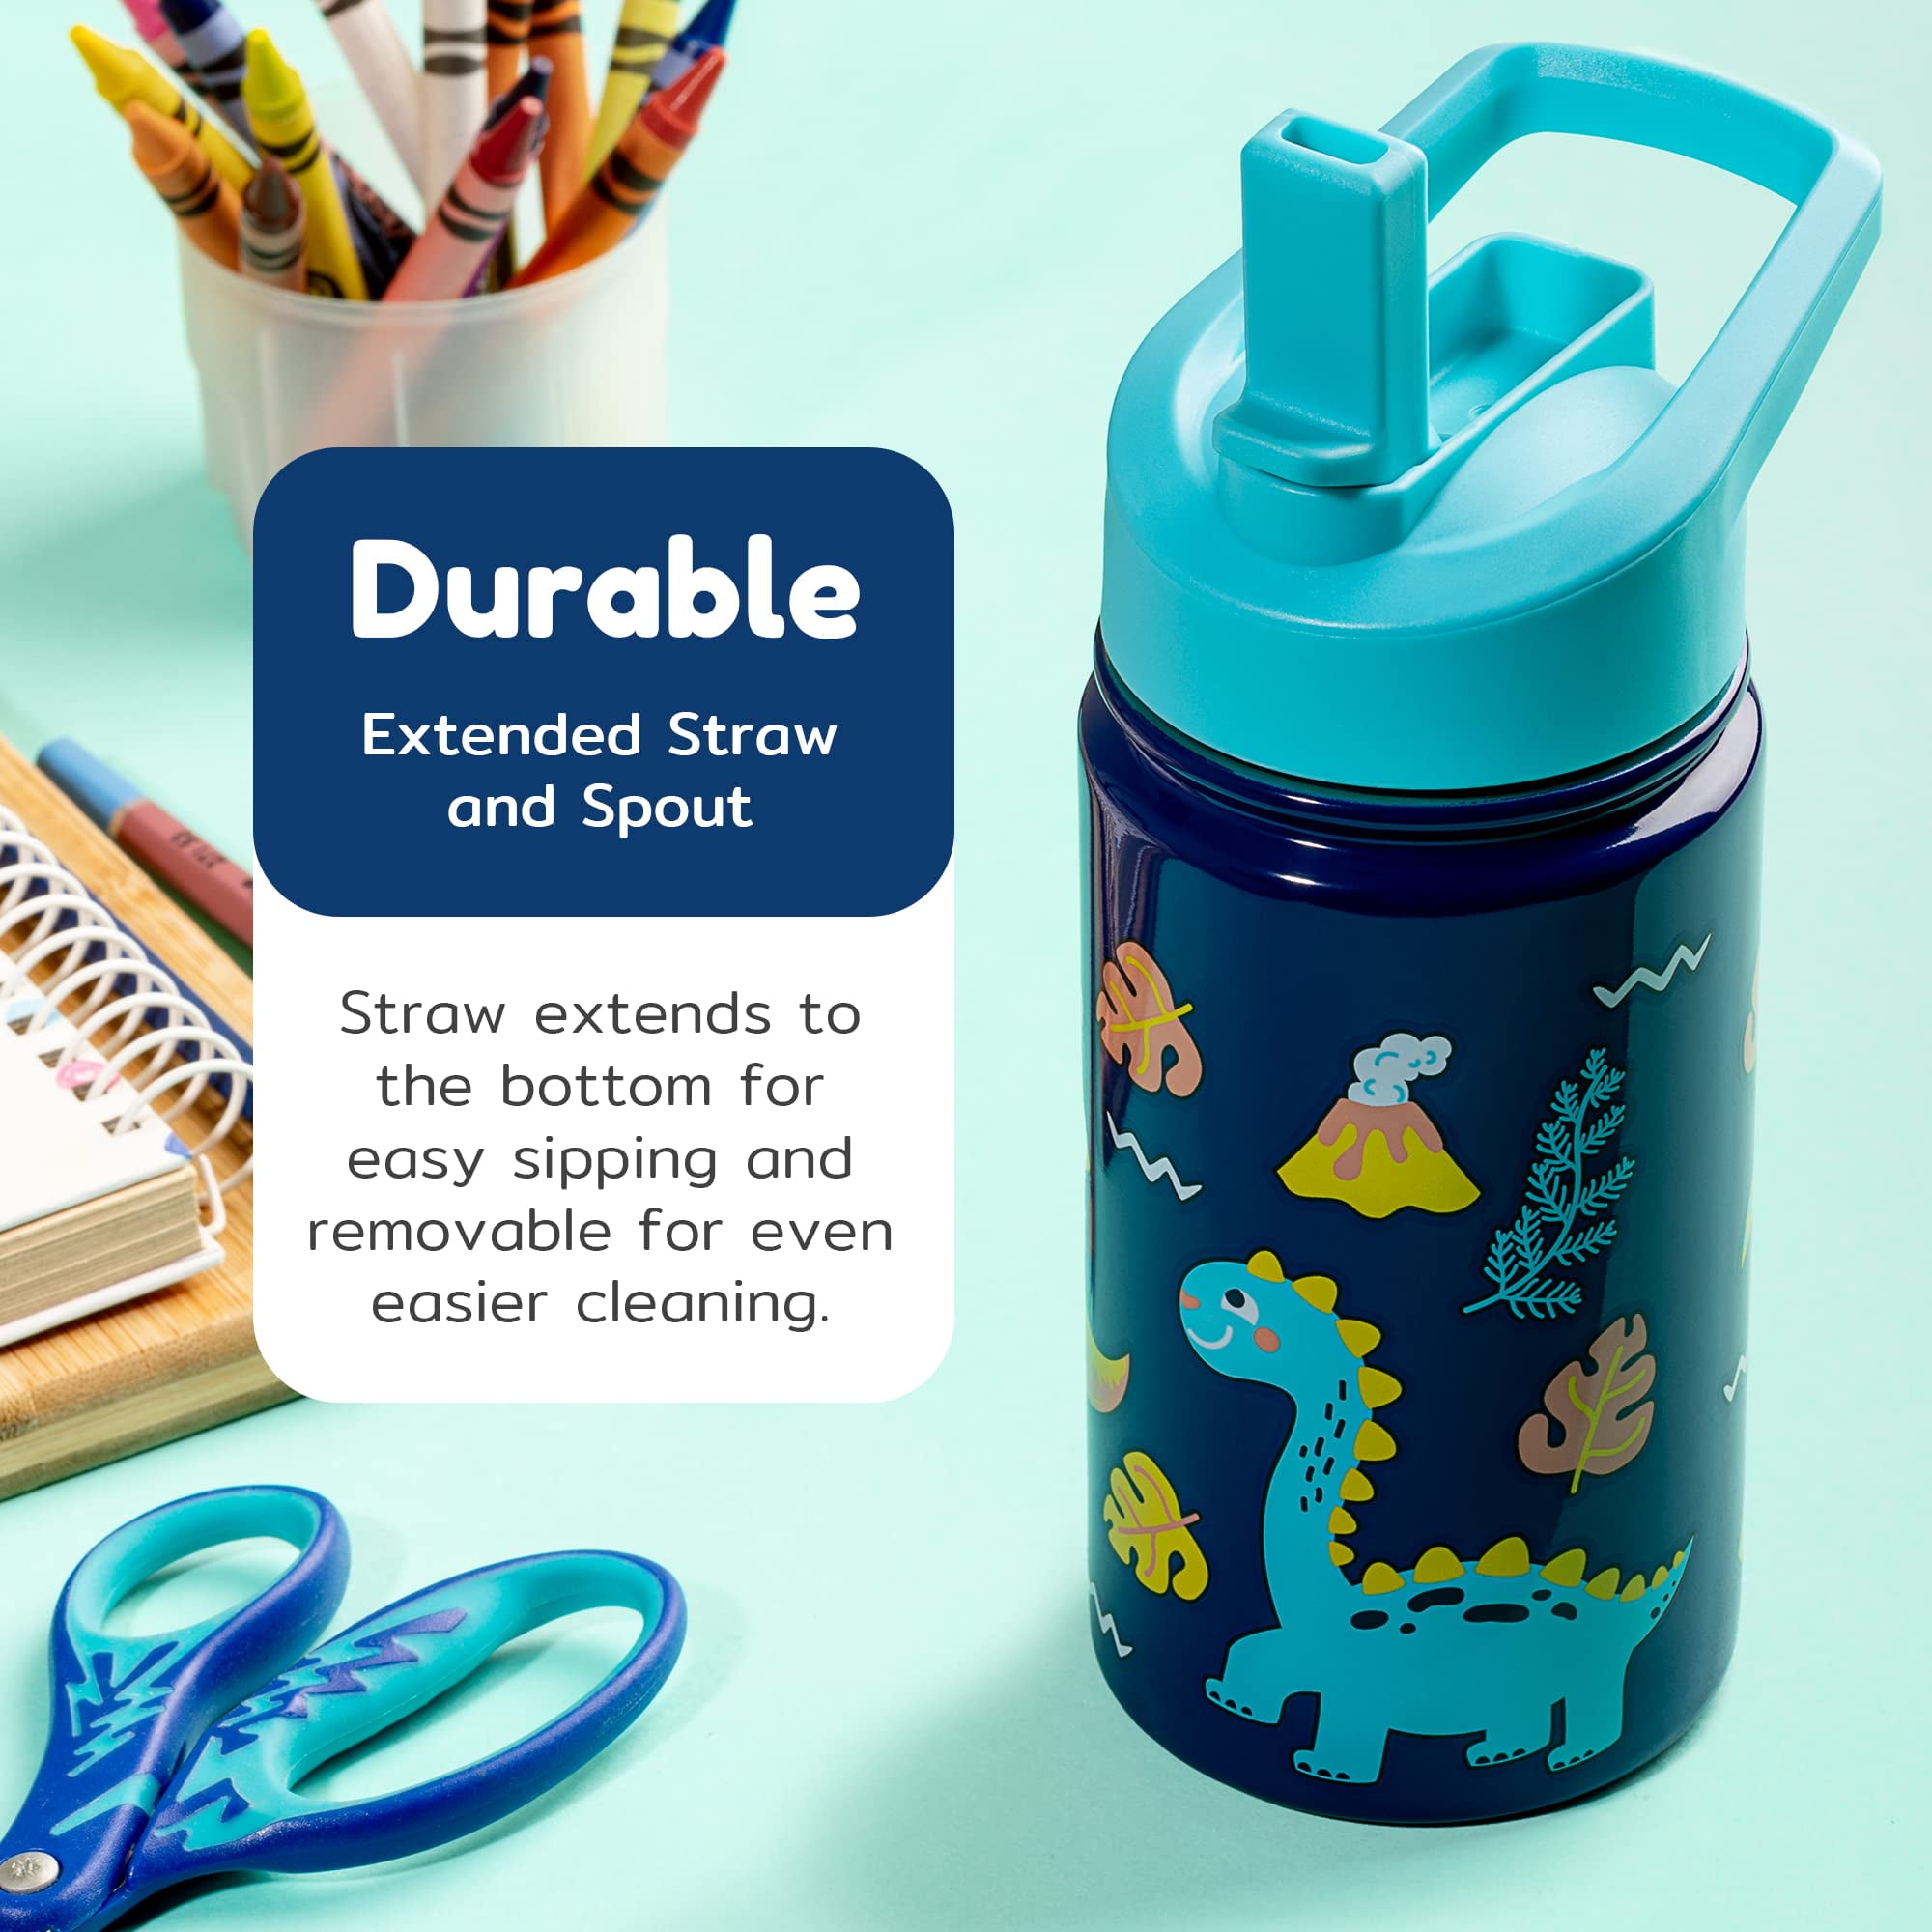 Always Be A Unicorn - Personalized Kids Water Bottle With Straw Lid –  Macorner